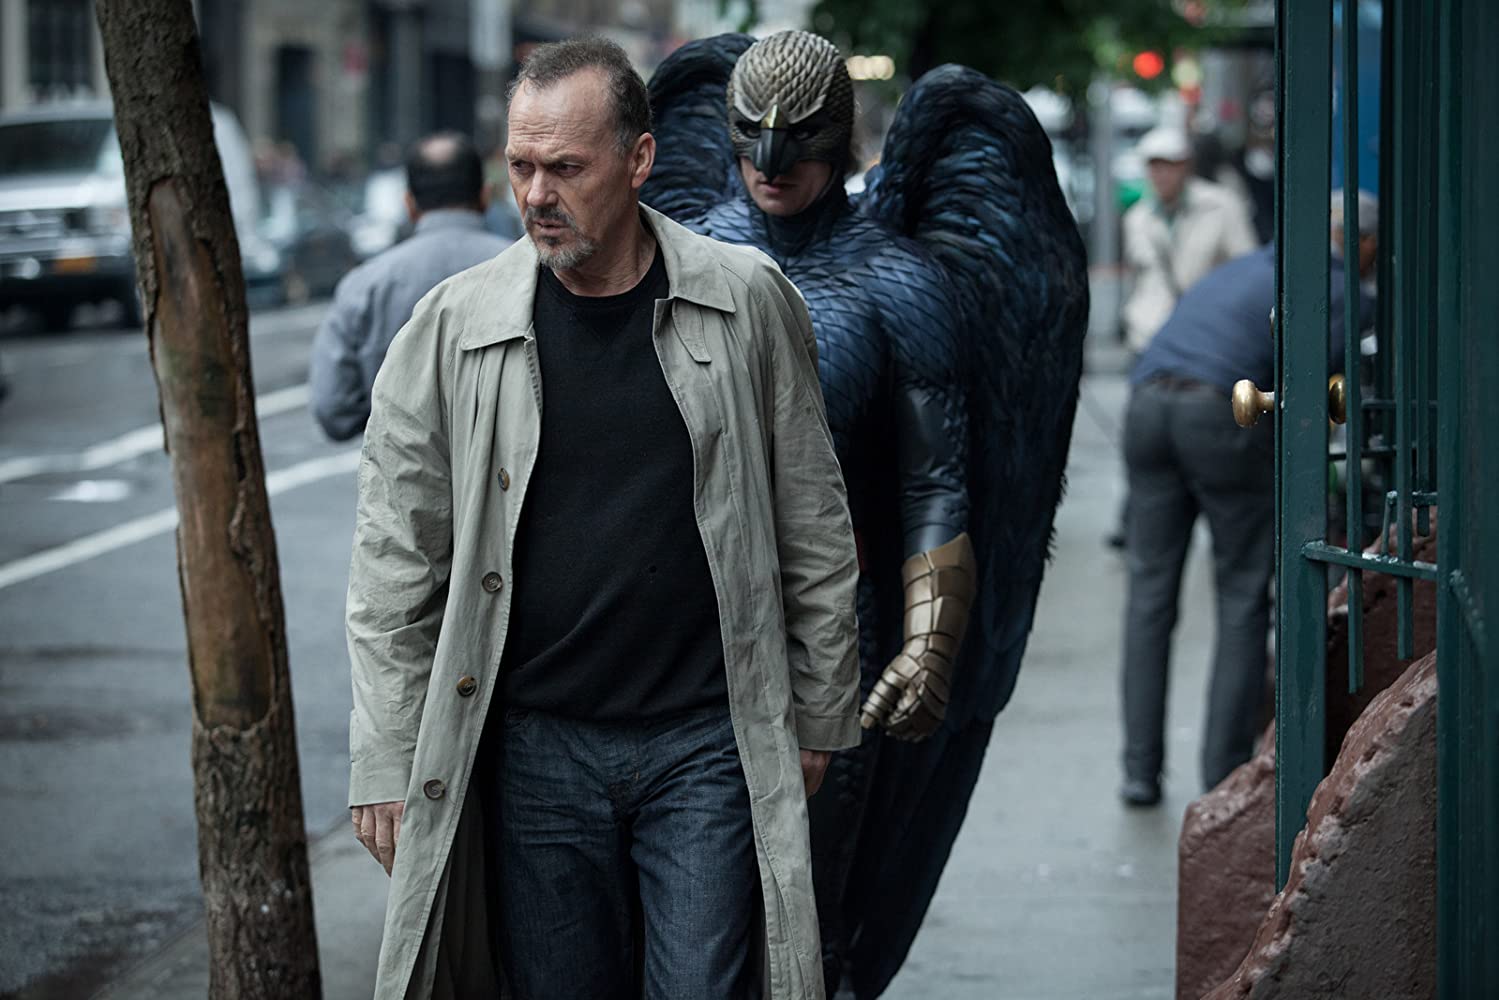 The former Birdman character appears to follow Riggan in his mind on a busy street.